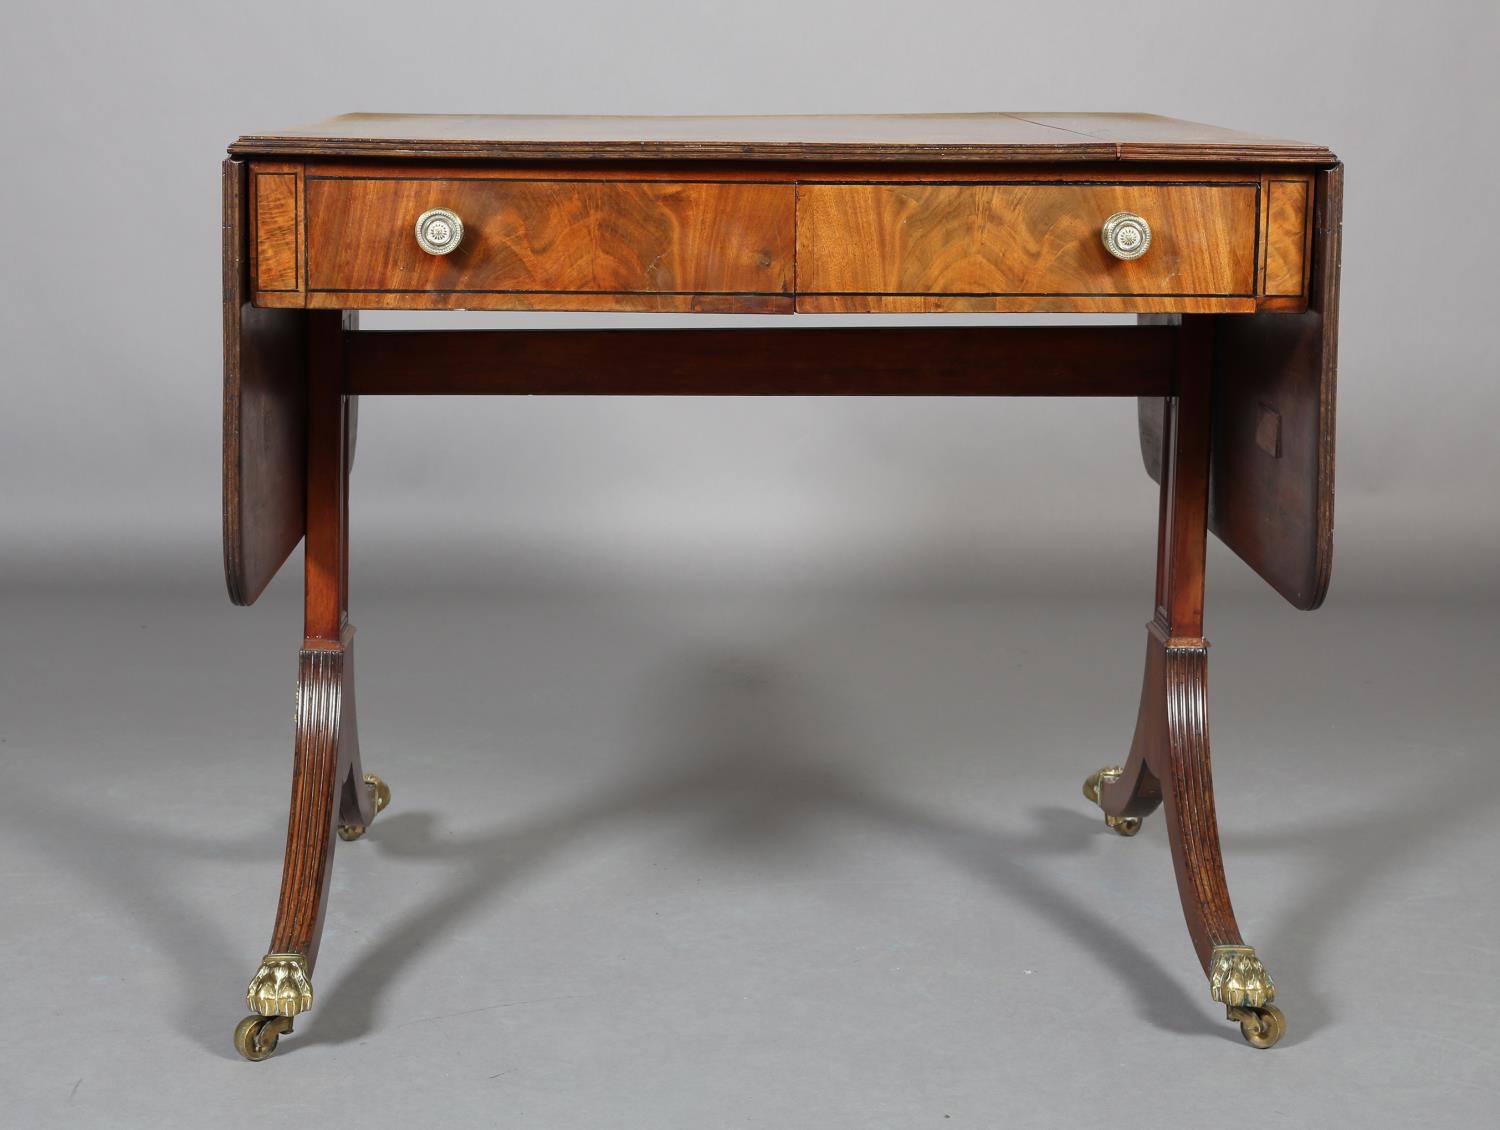 A Regency Mohogany and Rosewood crossbanded sofa table with ebony stringing, having a drawer and - Image 2 of 8